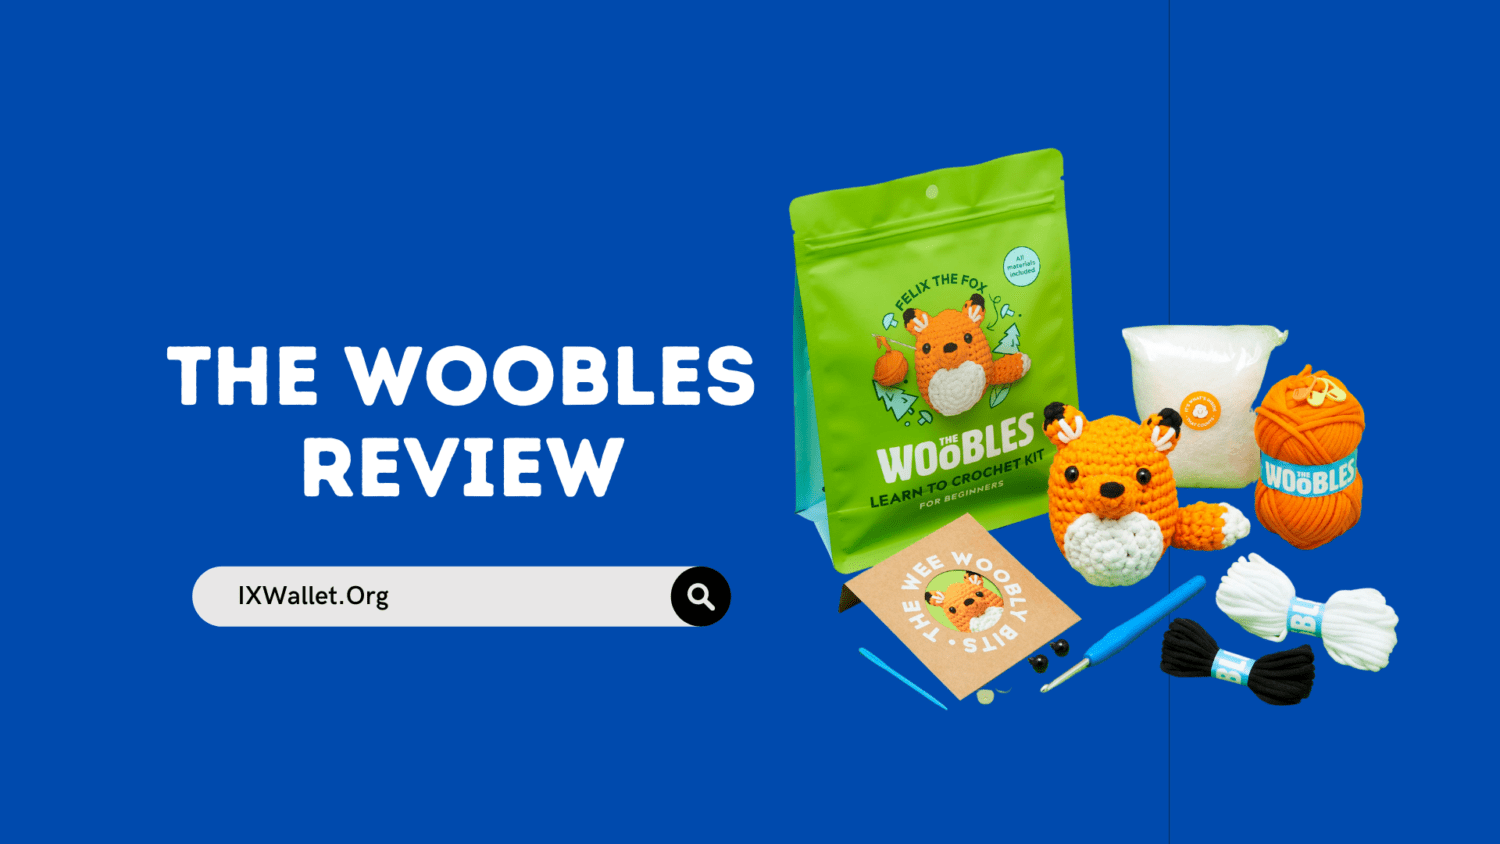 The Woobles Review: Best Crochet Kit for Beginners